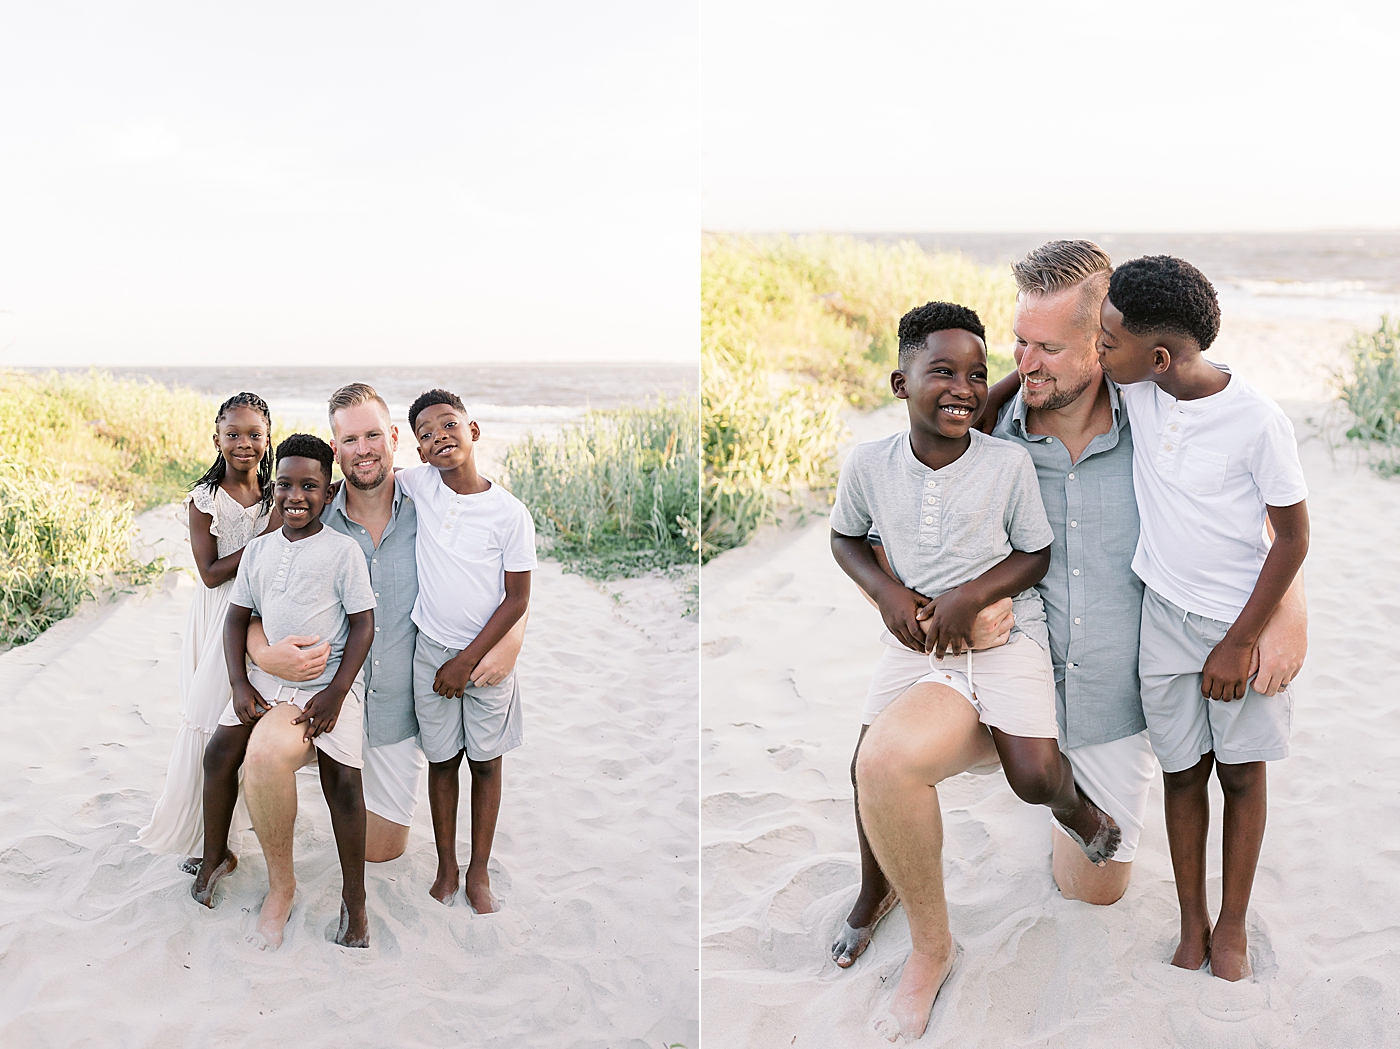 Dad interacting with kids on the beach | Image by Caitlyn Motycka